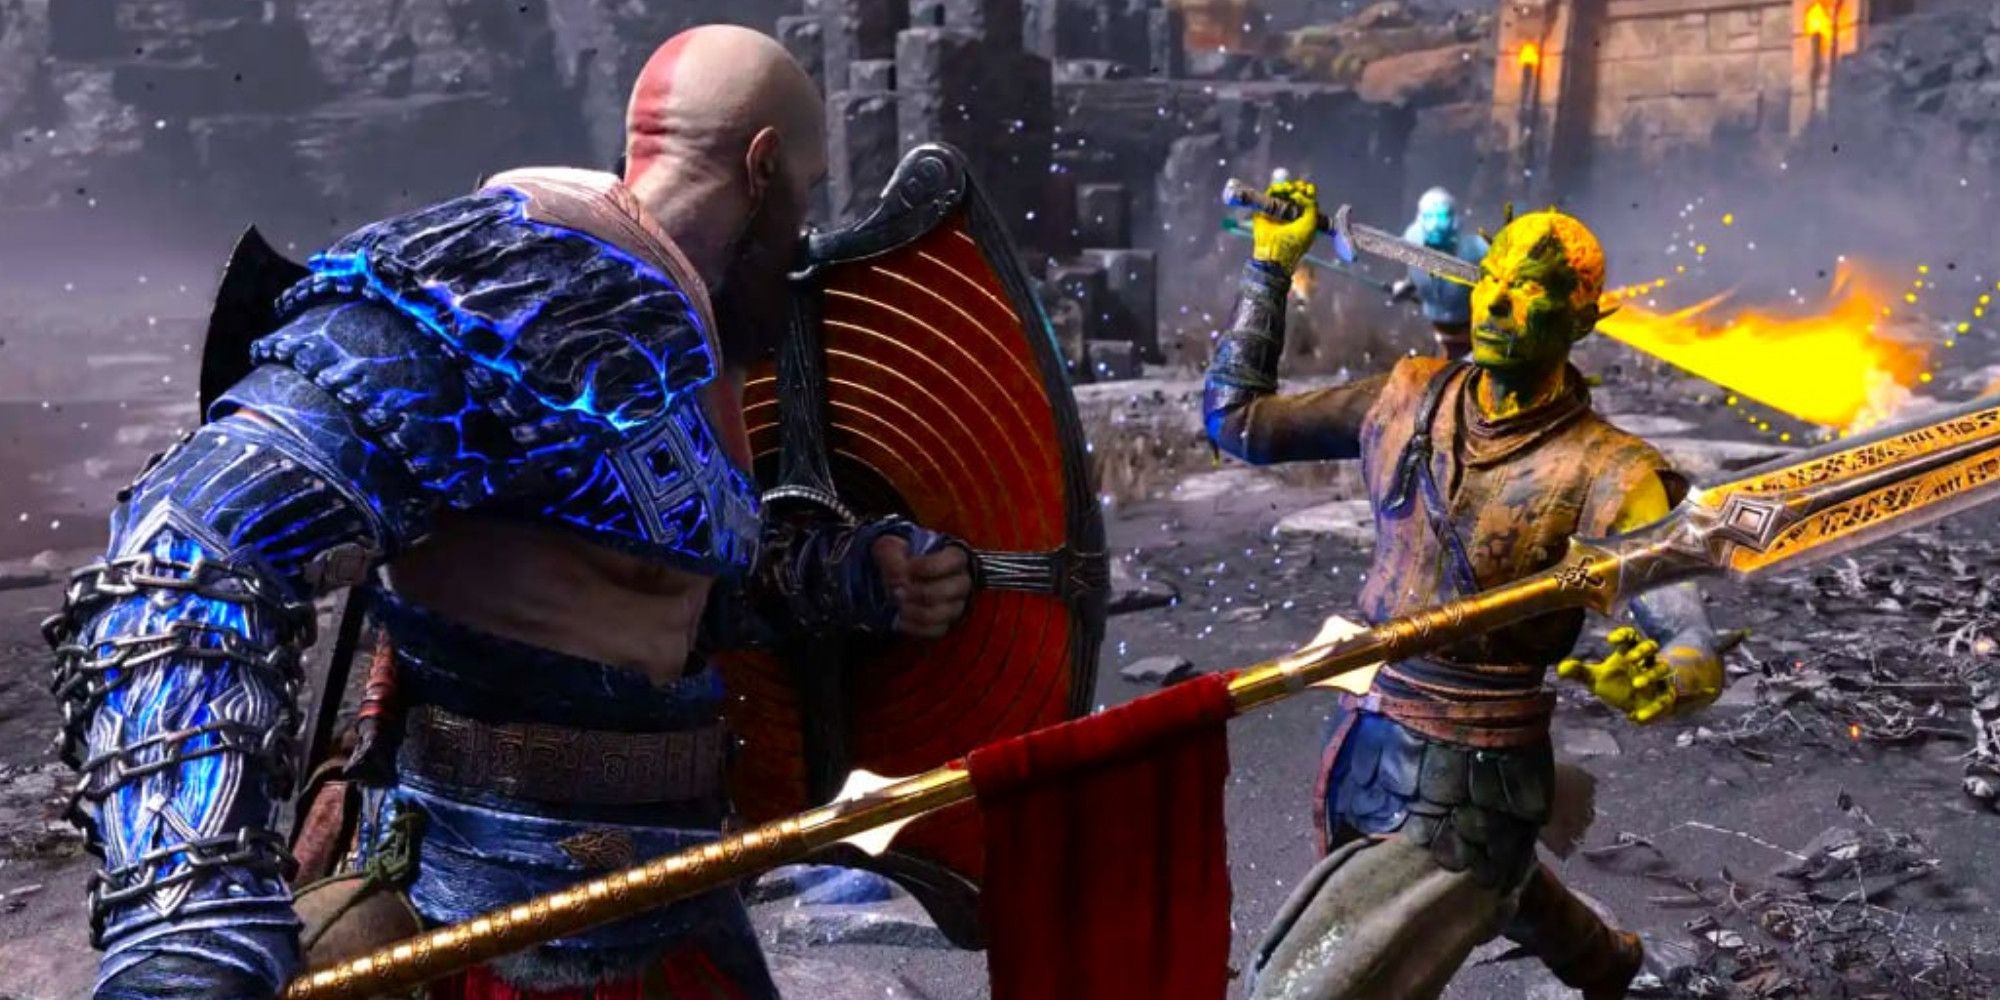 Kratos wearing blue shoulder armor and holding up a shield in preparation for an enemy's attack